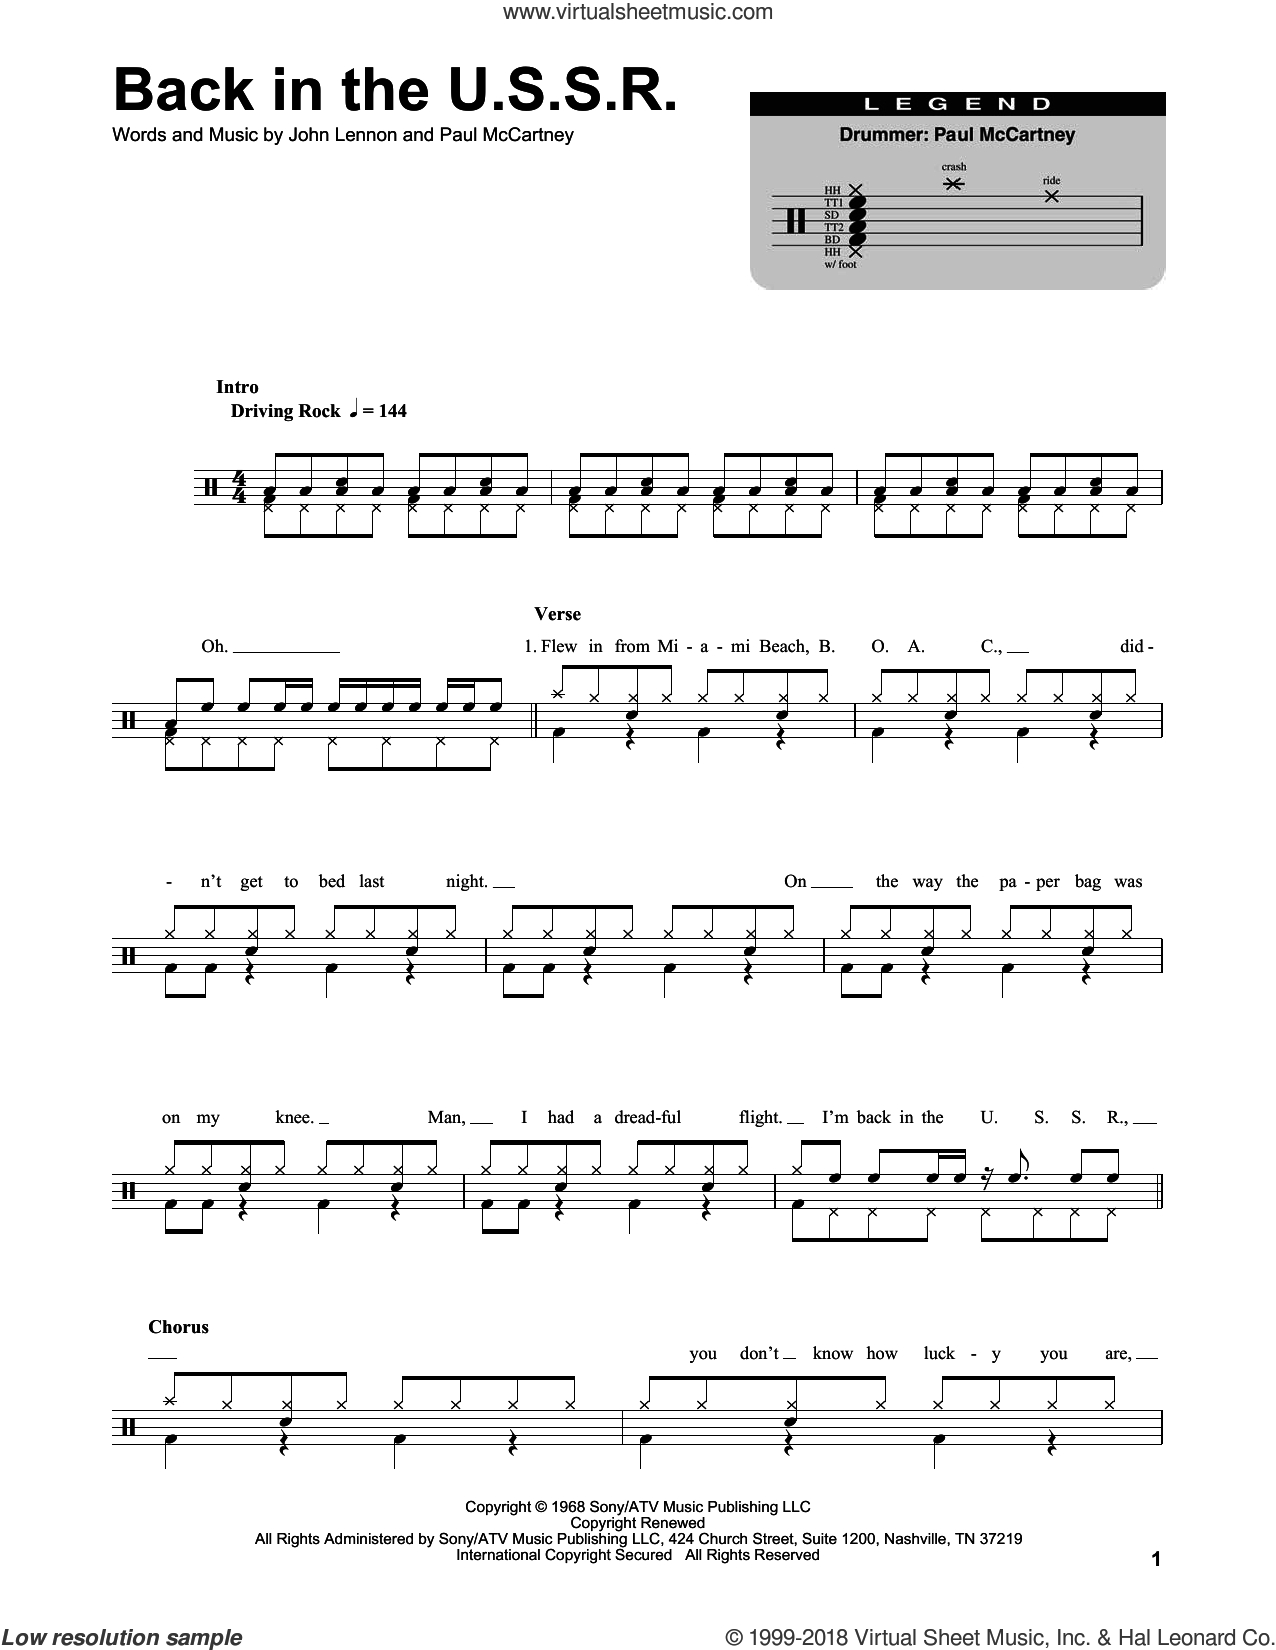 Beatles - Back In The U.s.s.r. Sheet Music For Drums [Pdf] - Free Printable Drum Sheet Music